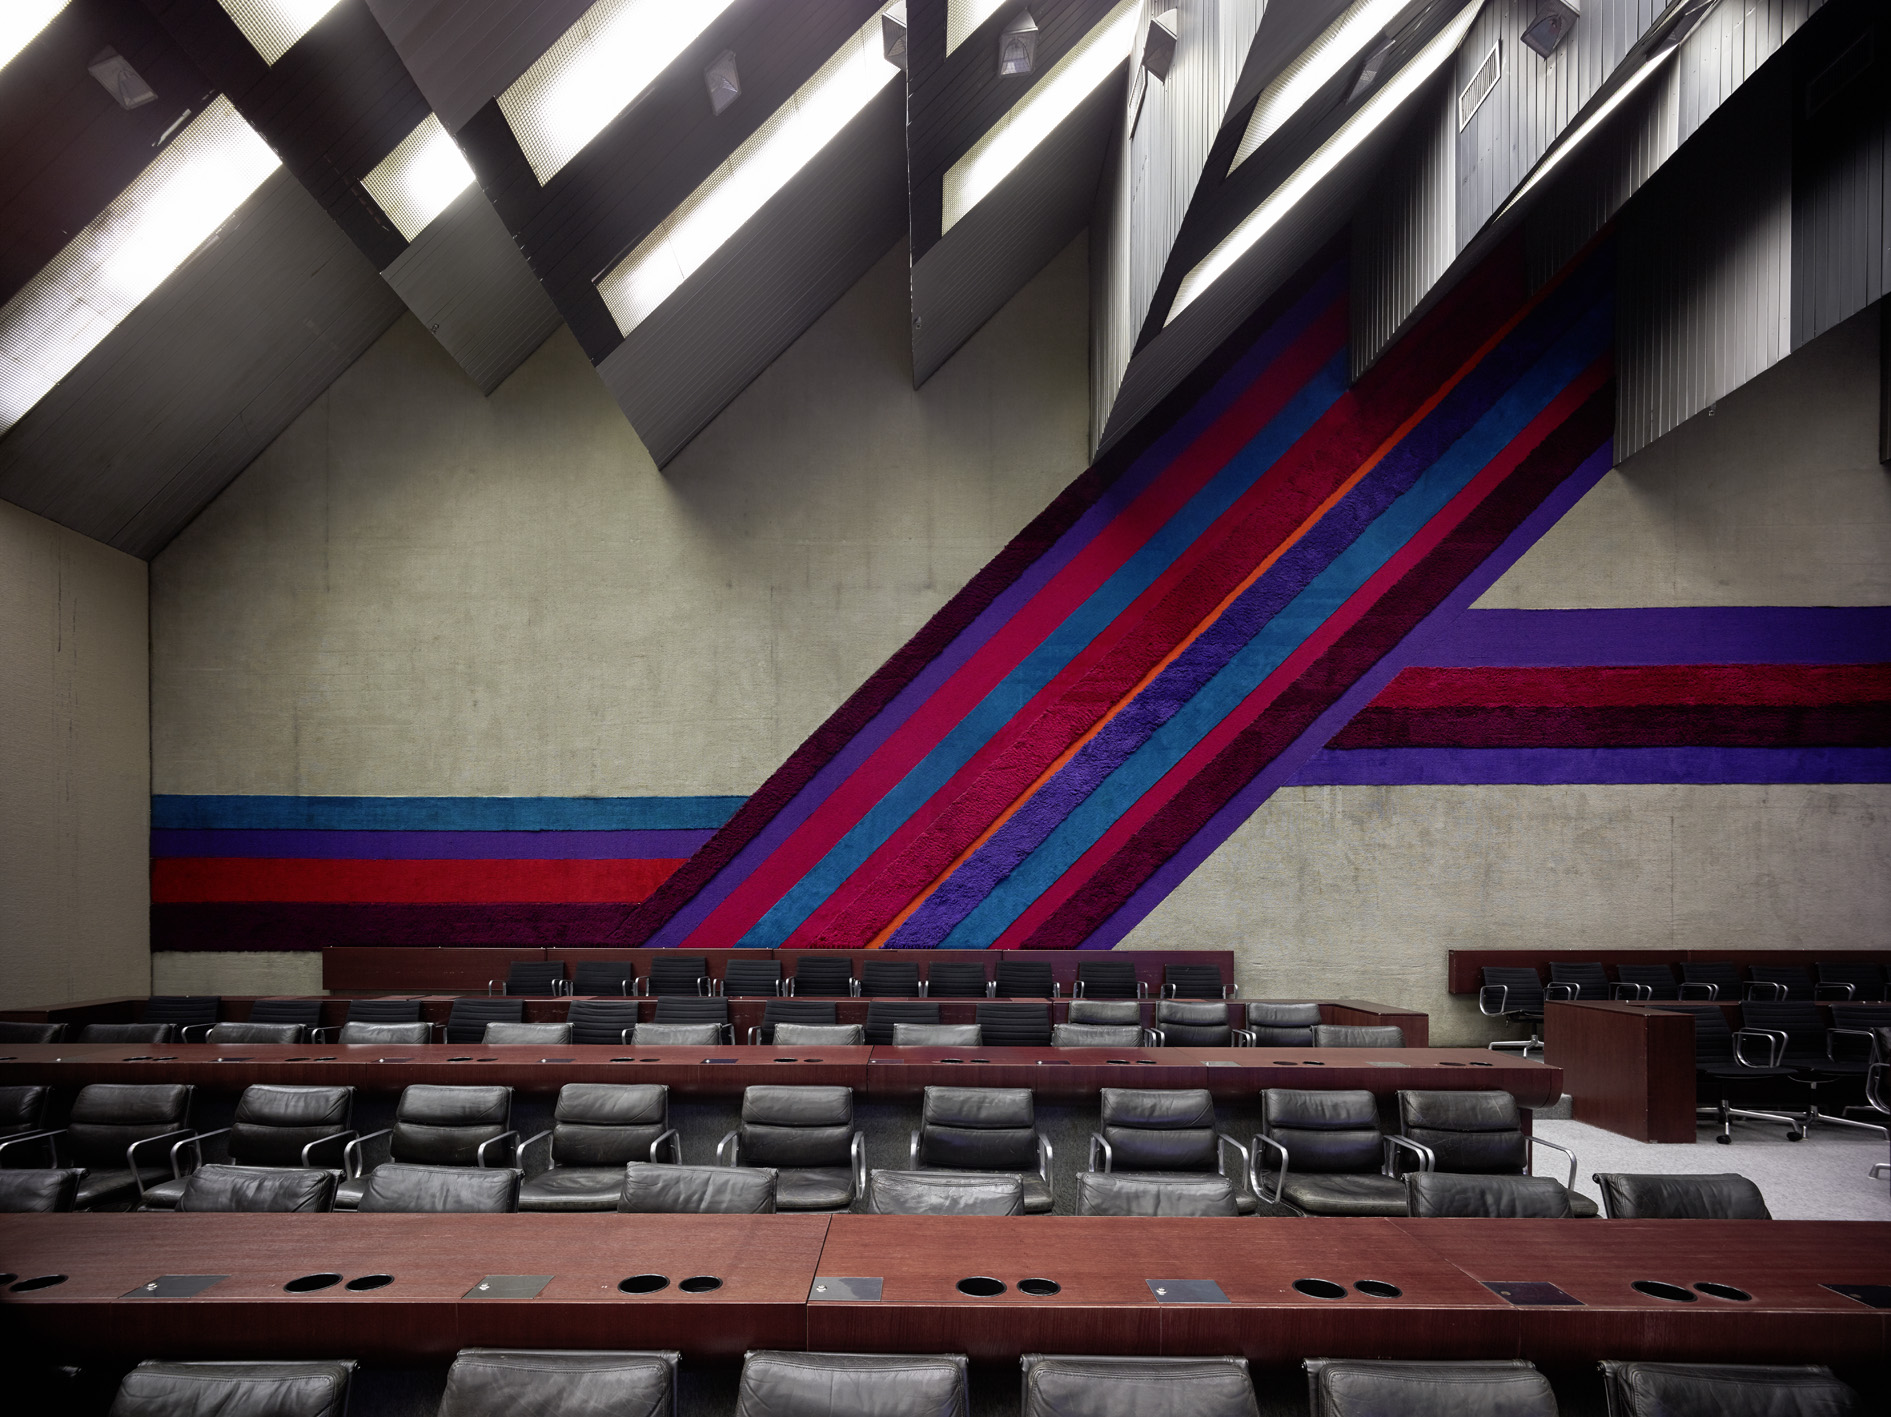 Stojan Maksimovi?, Sava Center, 1979, Belgrade, Serbia. View of conference room. Photo: Valentin Jeck, commissioned by The Museum of Modern Art, New York, 2016.